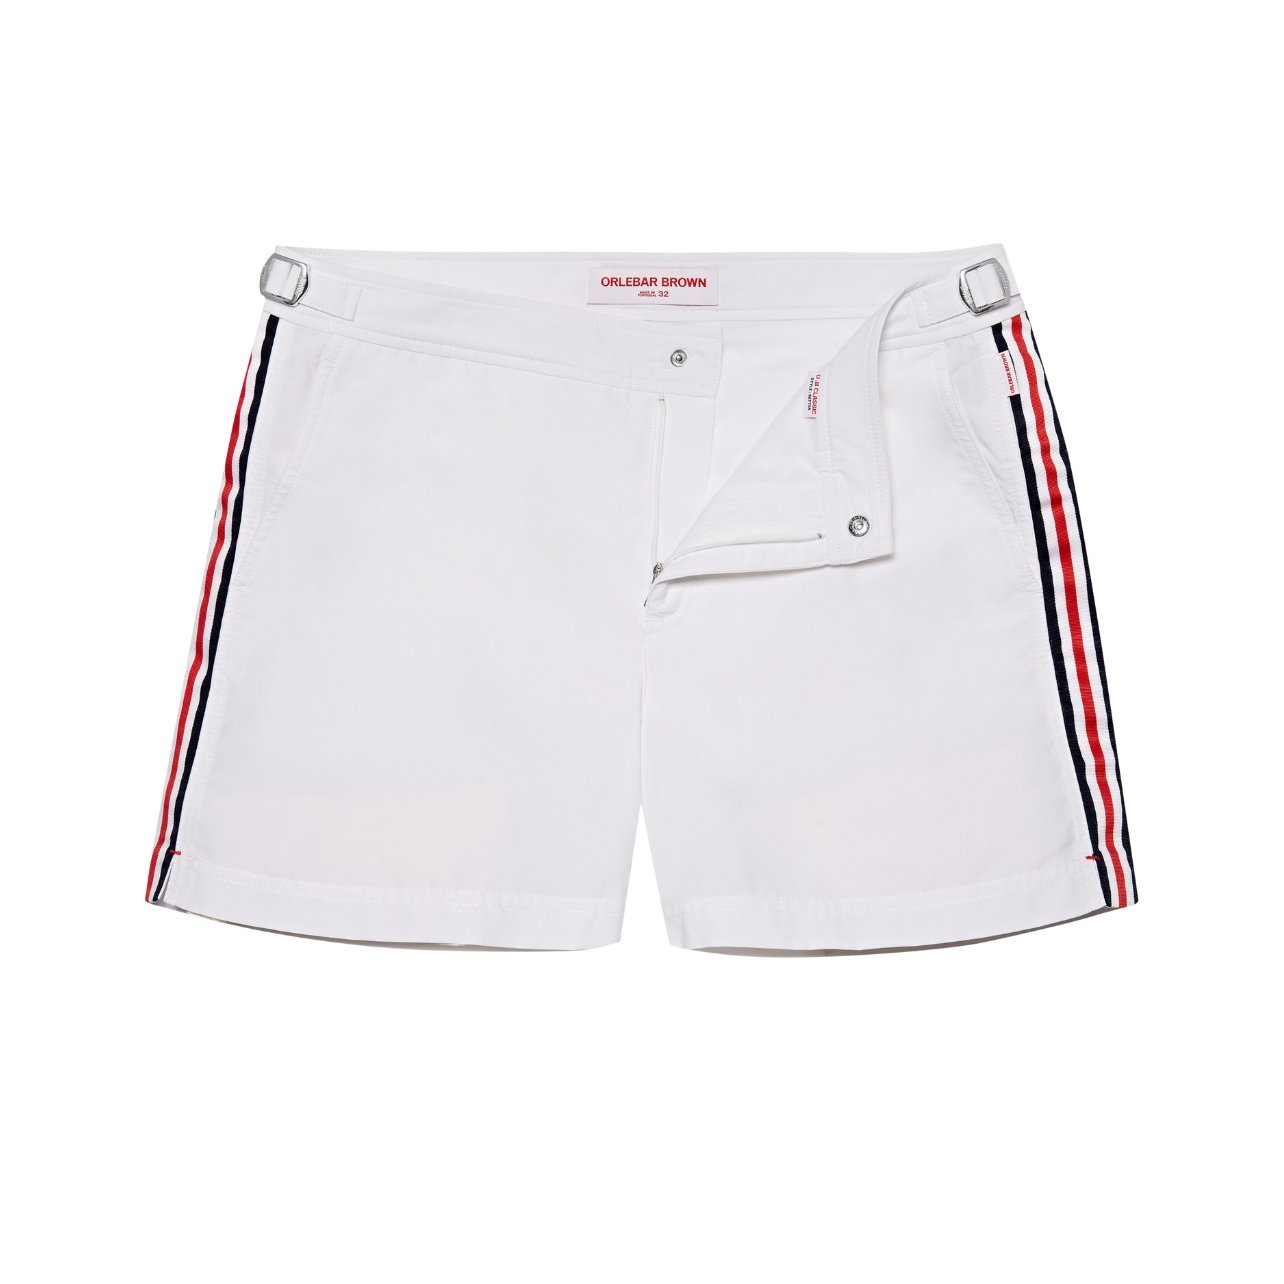 Orlebar Brown white swim trunks with red and navy trim down the sides